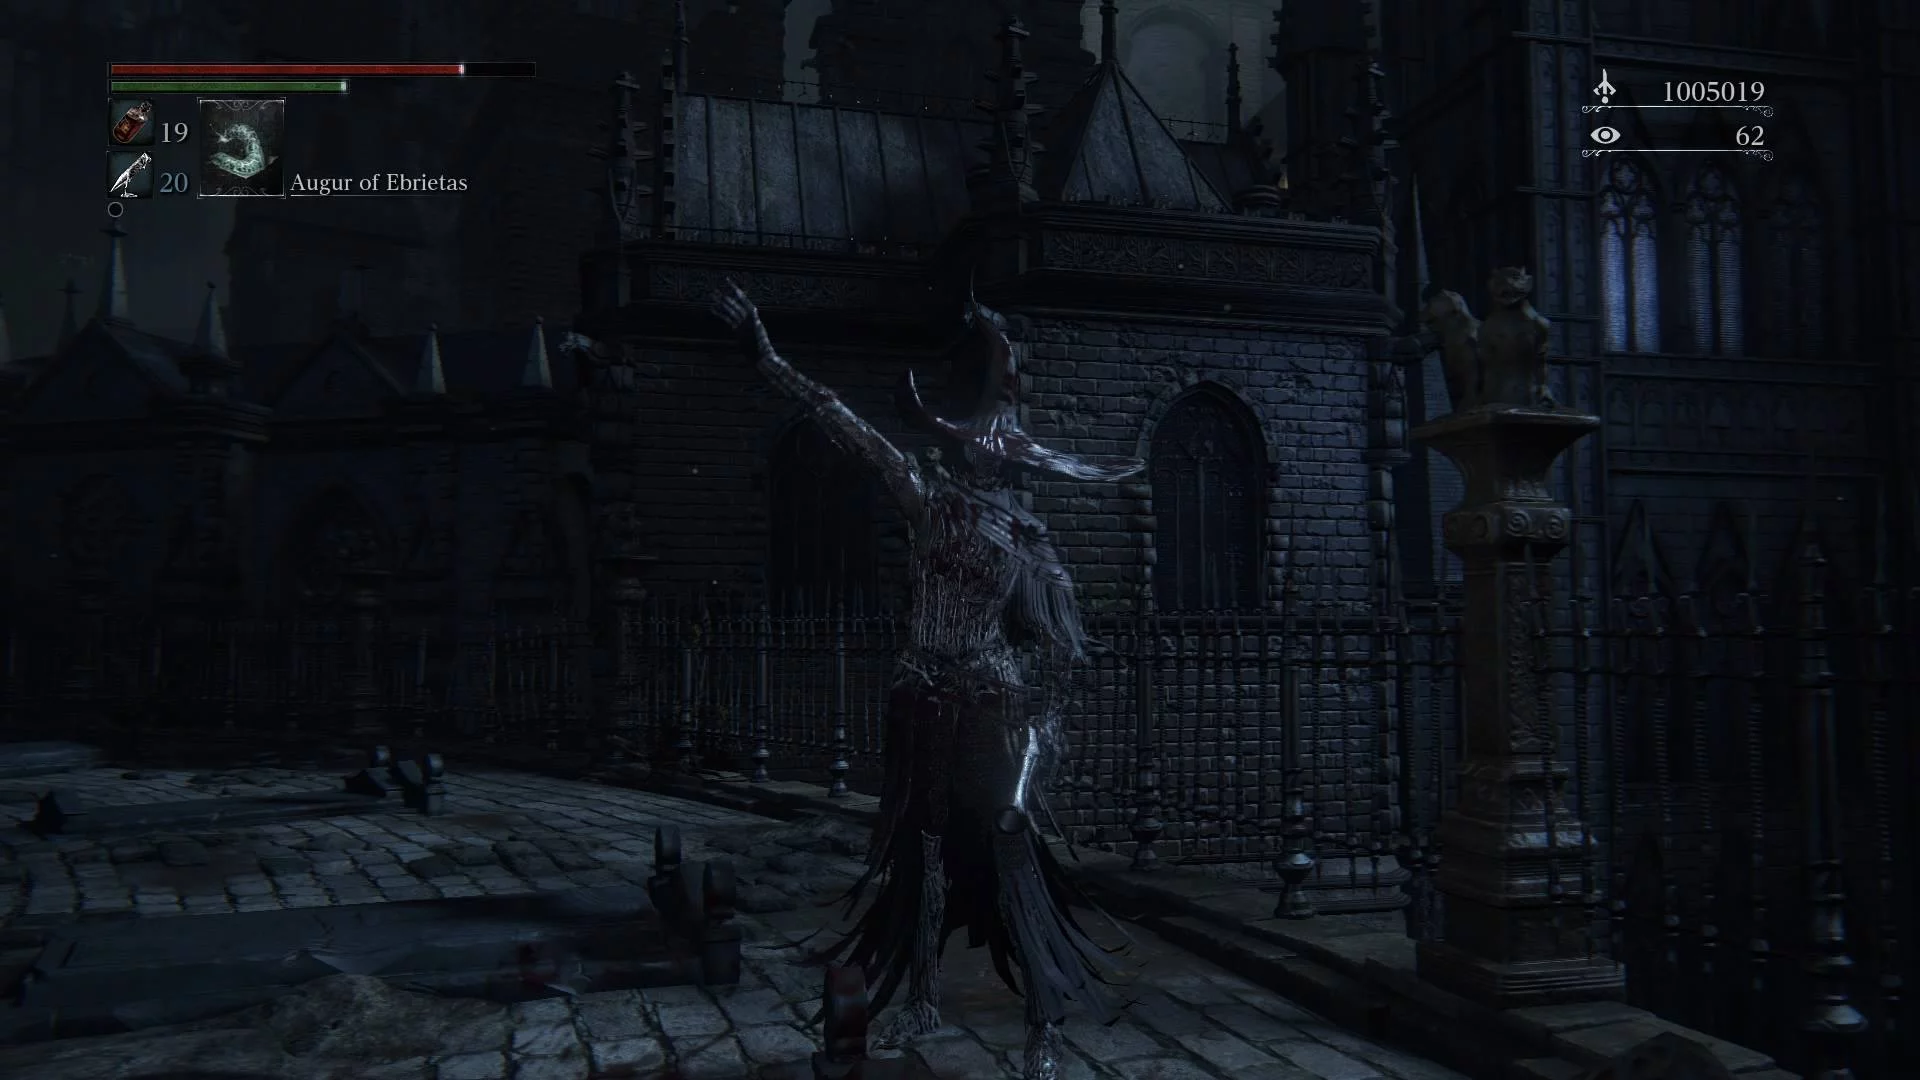 Sony Deletes Bloodborne Tweet That Caused Fans To Believe An Announcement  Was Coming - GameSpot